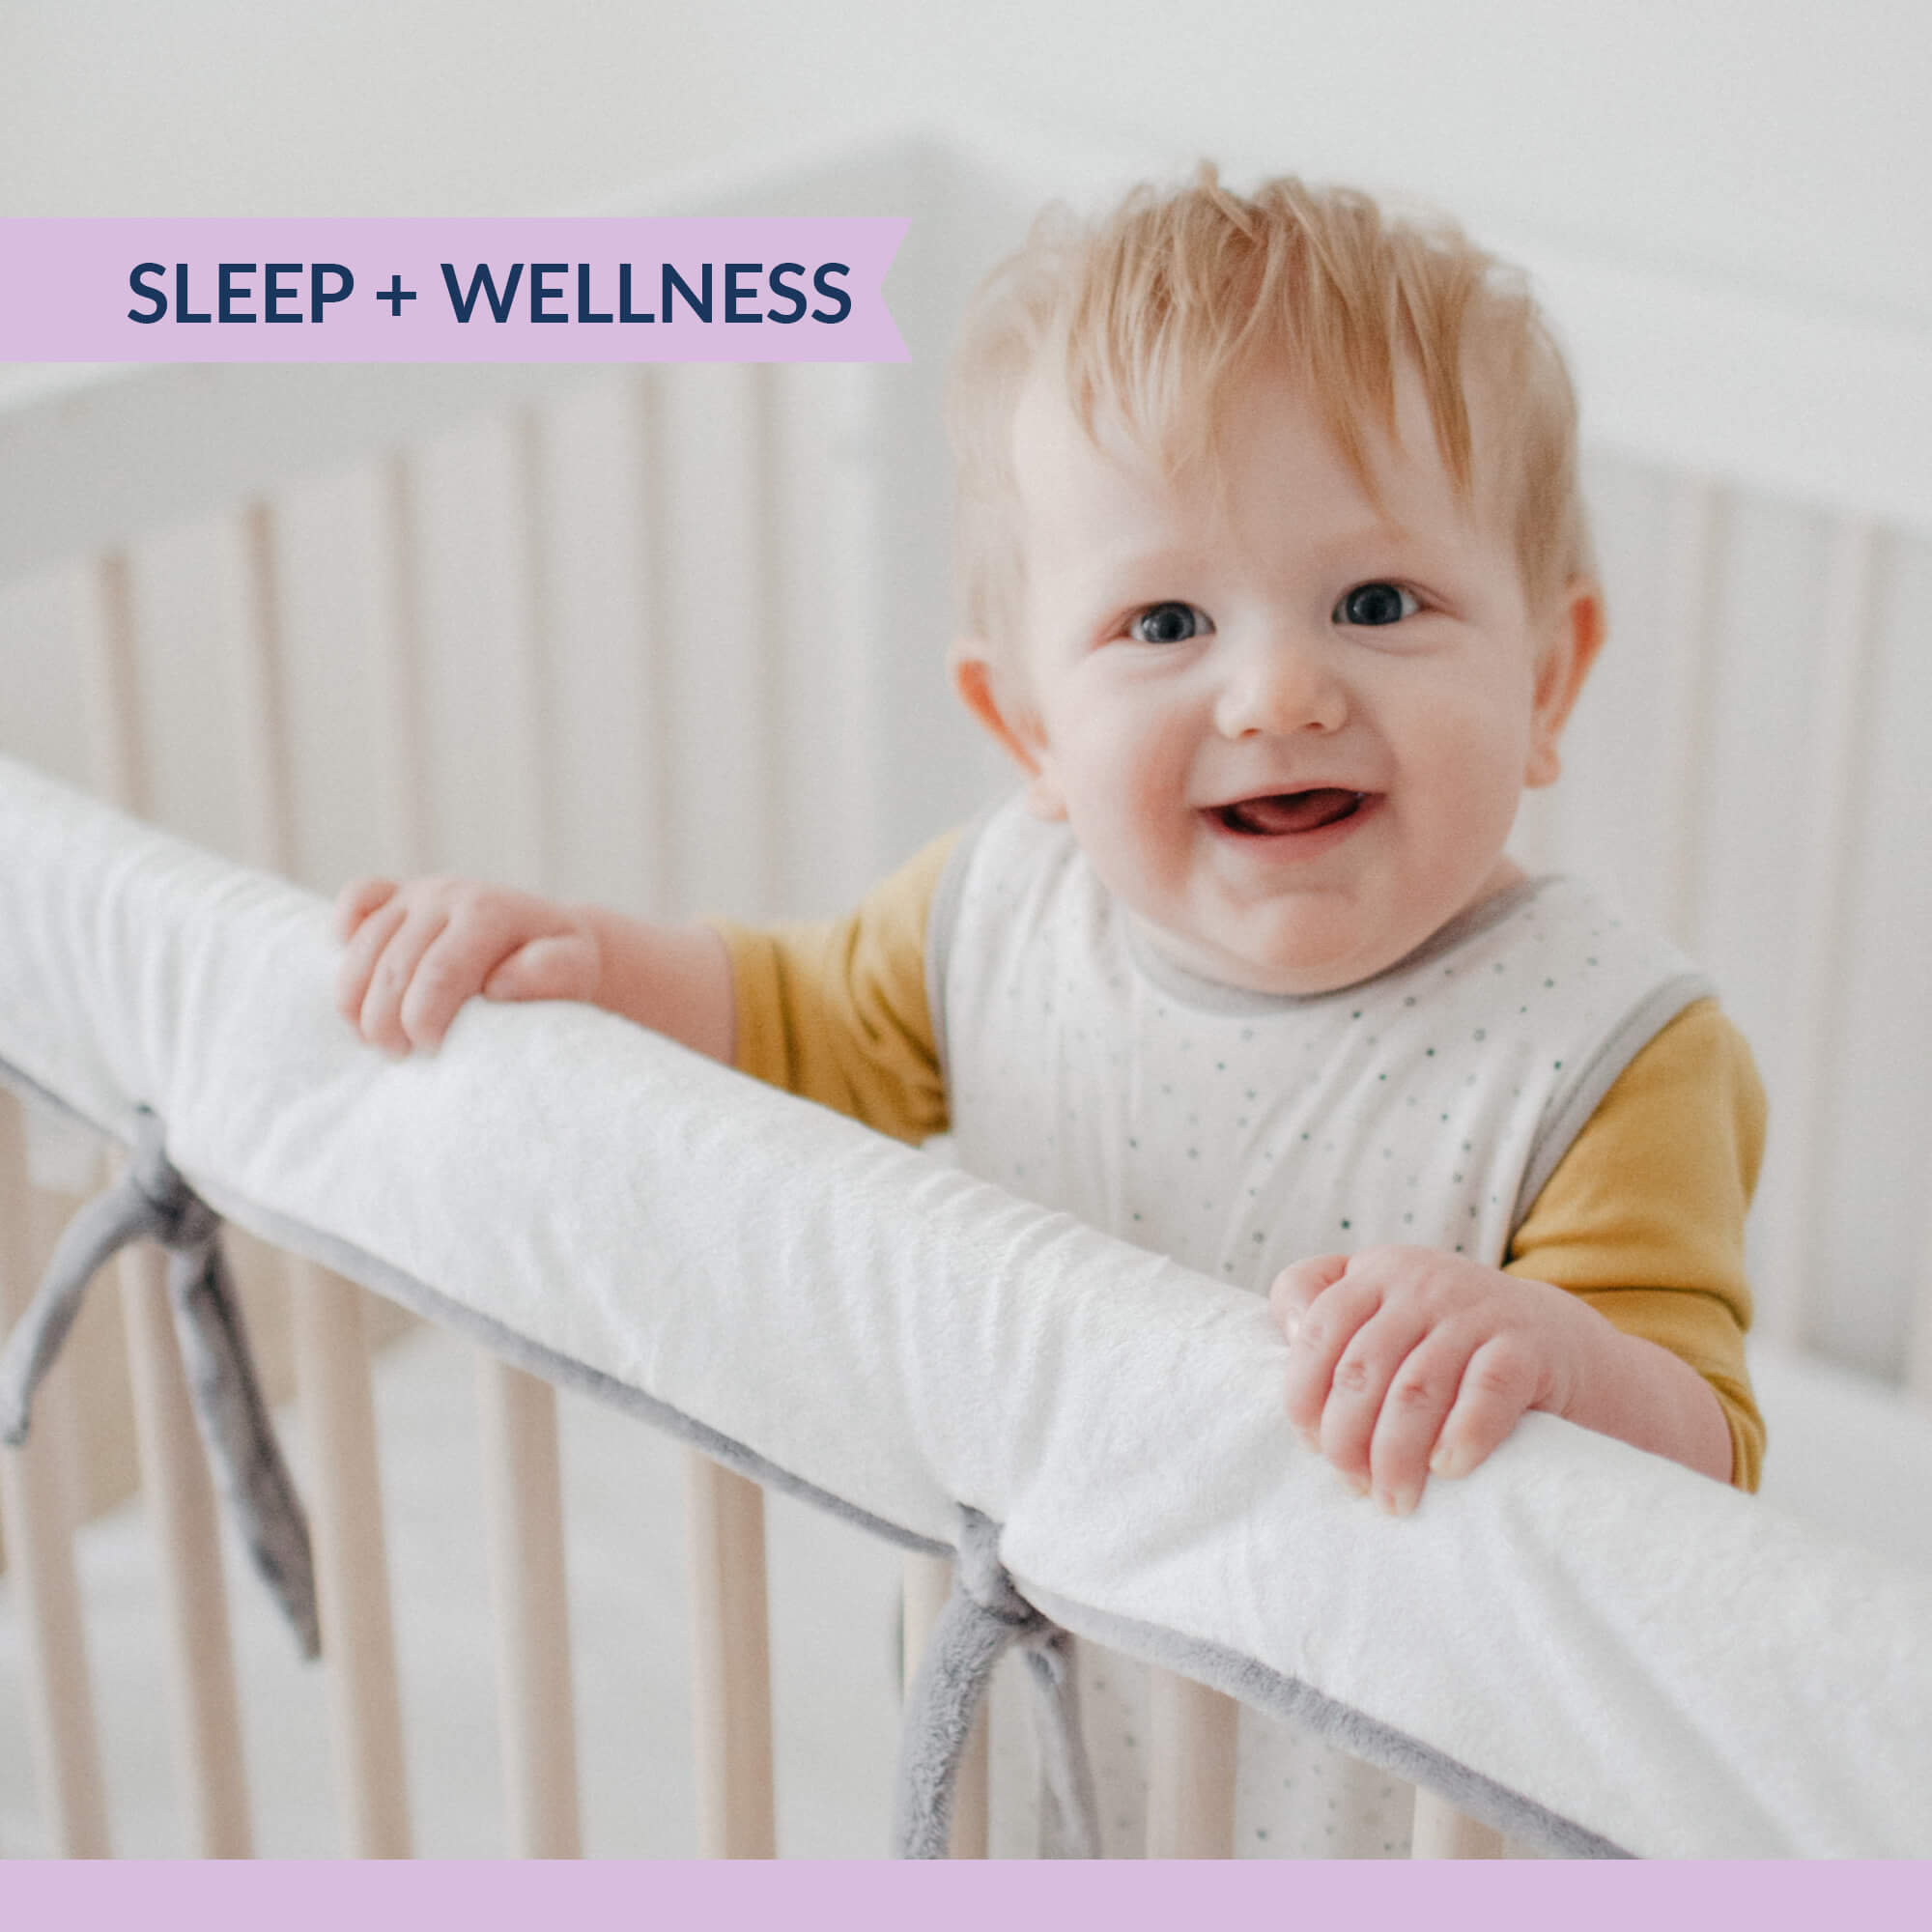 Baby fighting sleep? Try these solutions to end all-nighters.